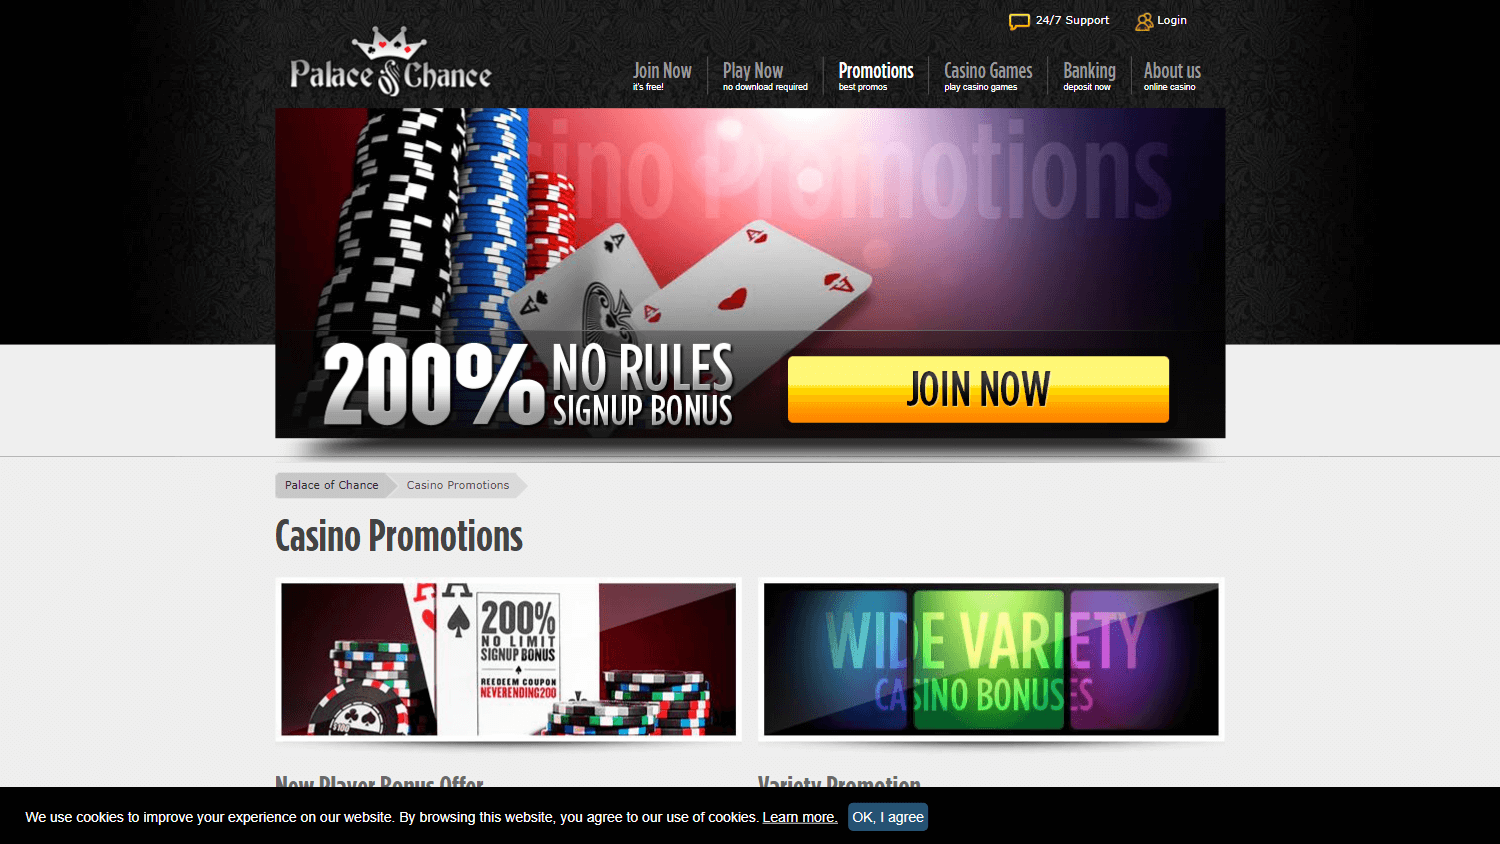 Instant Play Casino  Play Palace of Chance Casino Games Online